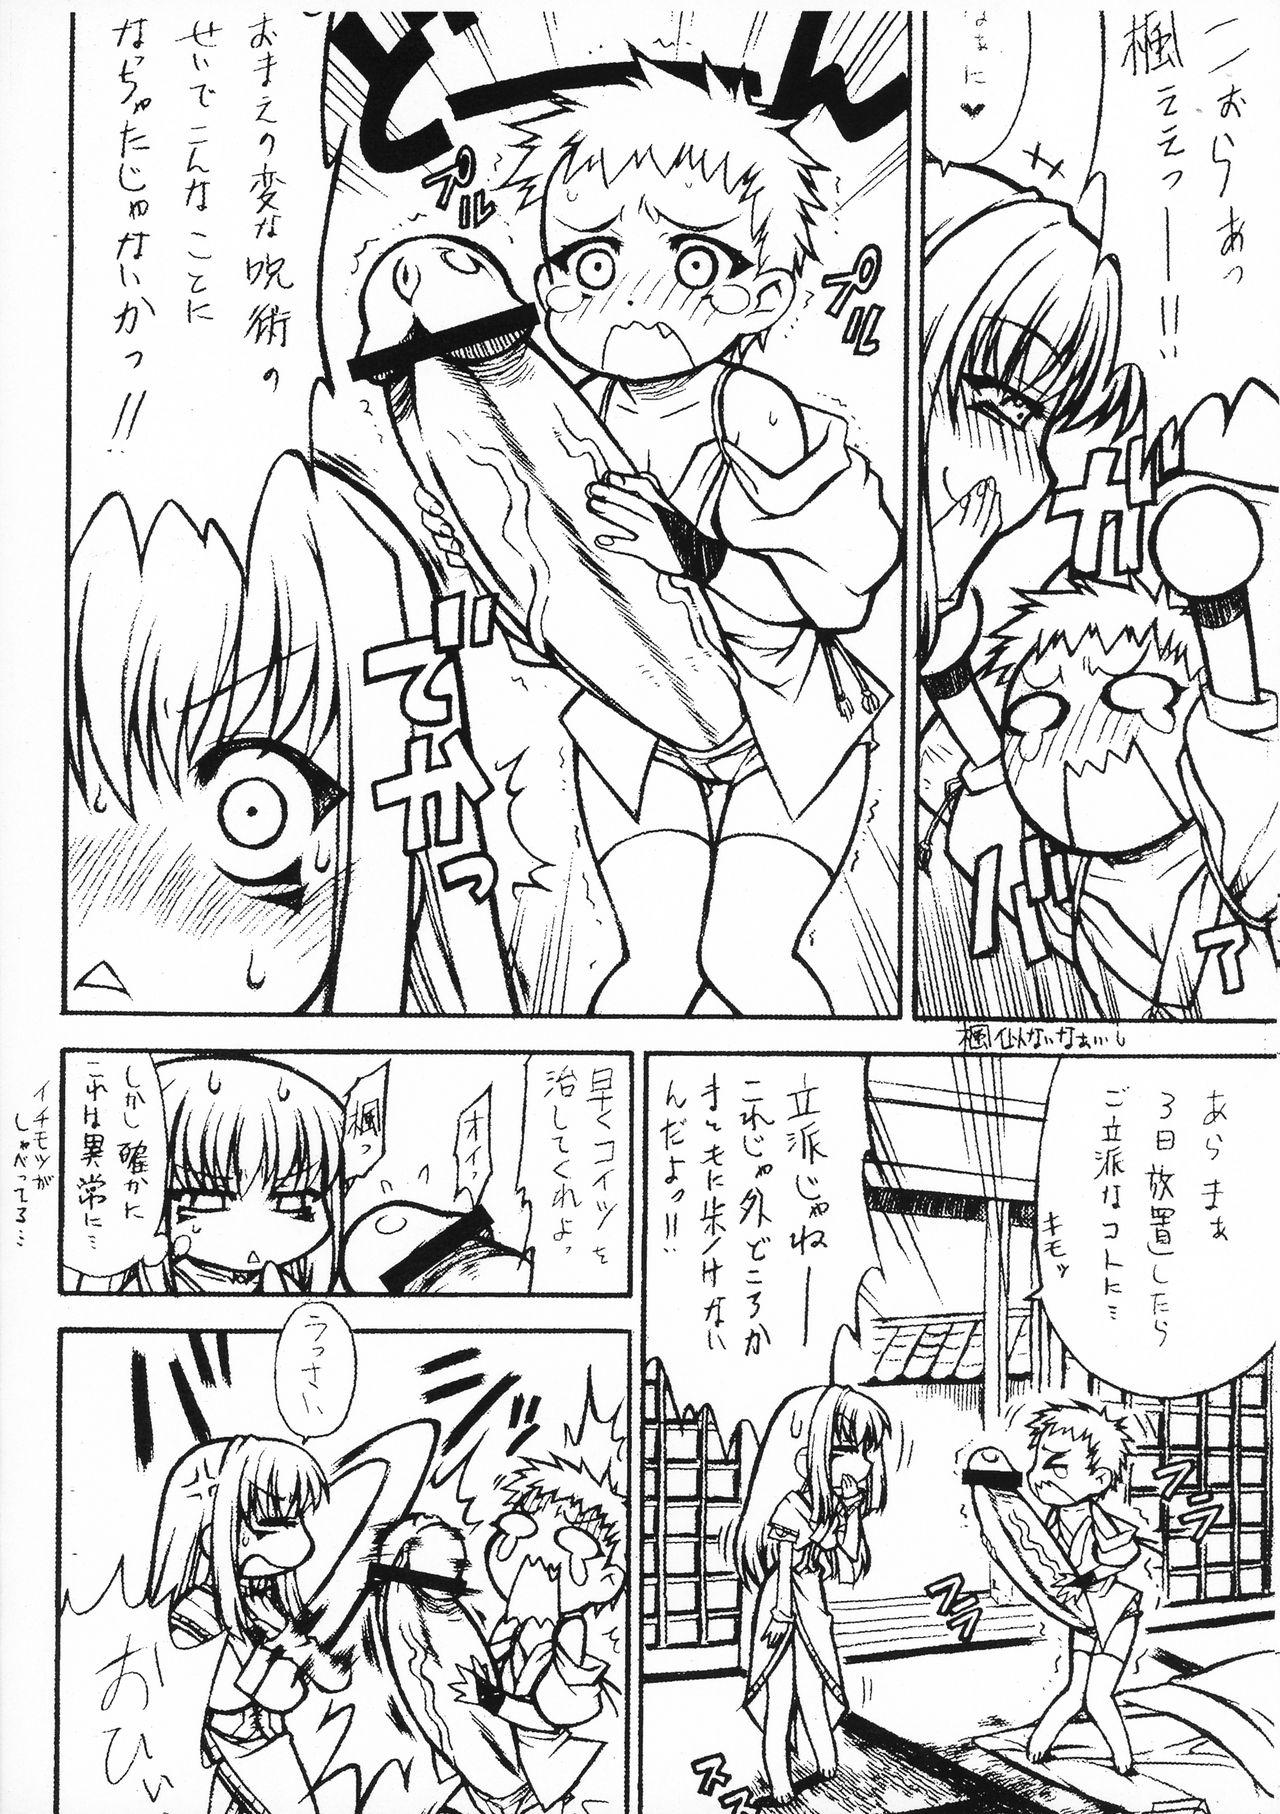 Prostitute Tenshi no Misao GAMESPECIAL II Yohan Soles - Page 4